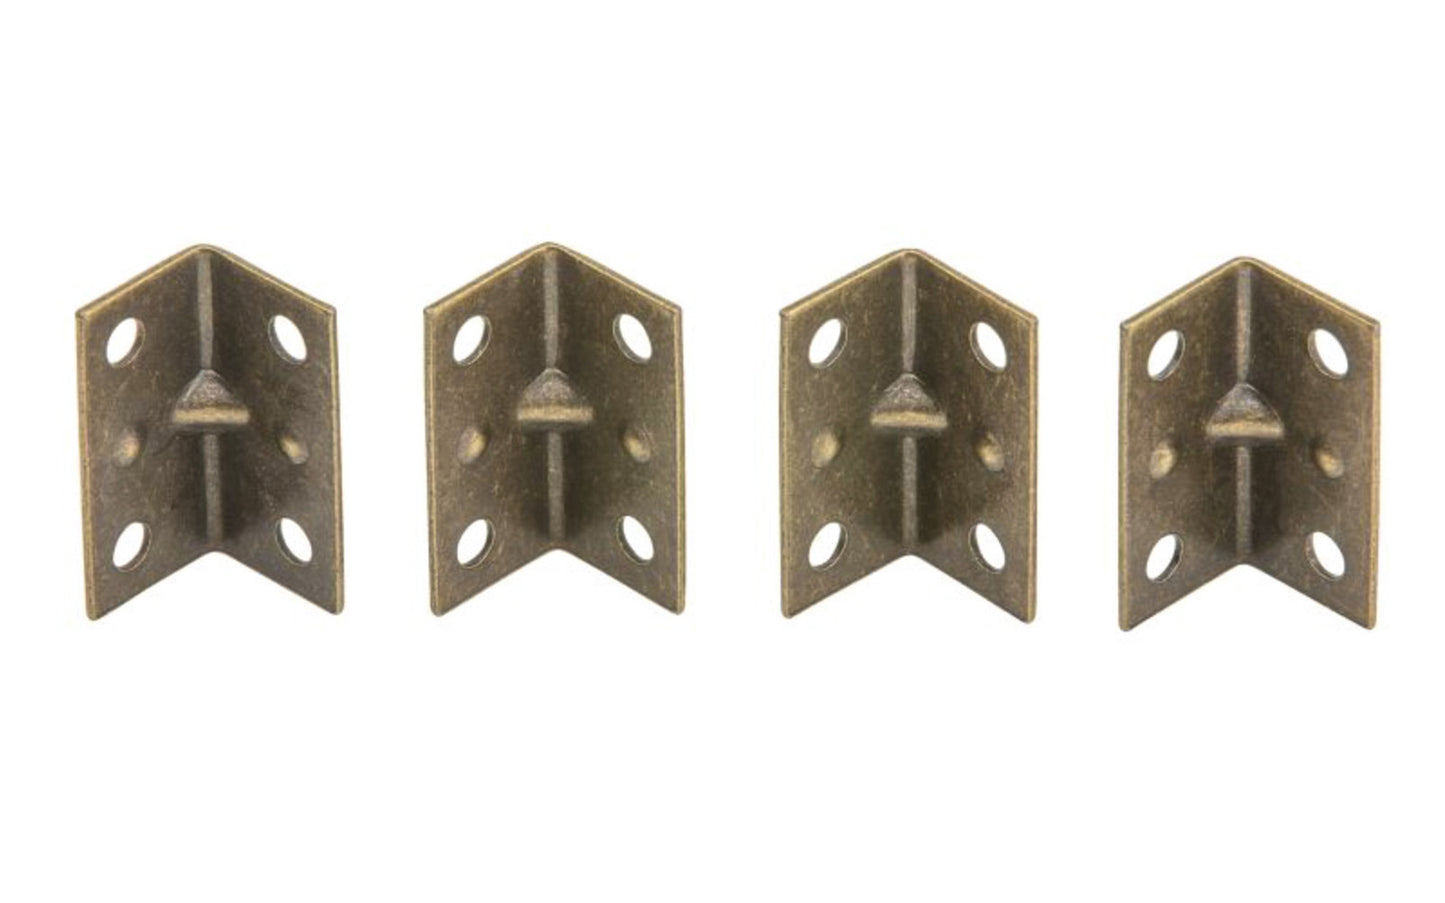 These 1-1/2" x 3/4" antique brass corner braces are designed for furniture, countertops, shelving support, etc. Allows for quick & easy repair of items & other home, workshop, & industrial applications. Made of steel material with a antique brass finish. 4 Pack. National Hardware Model No. N226-282. 038613226289. 